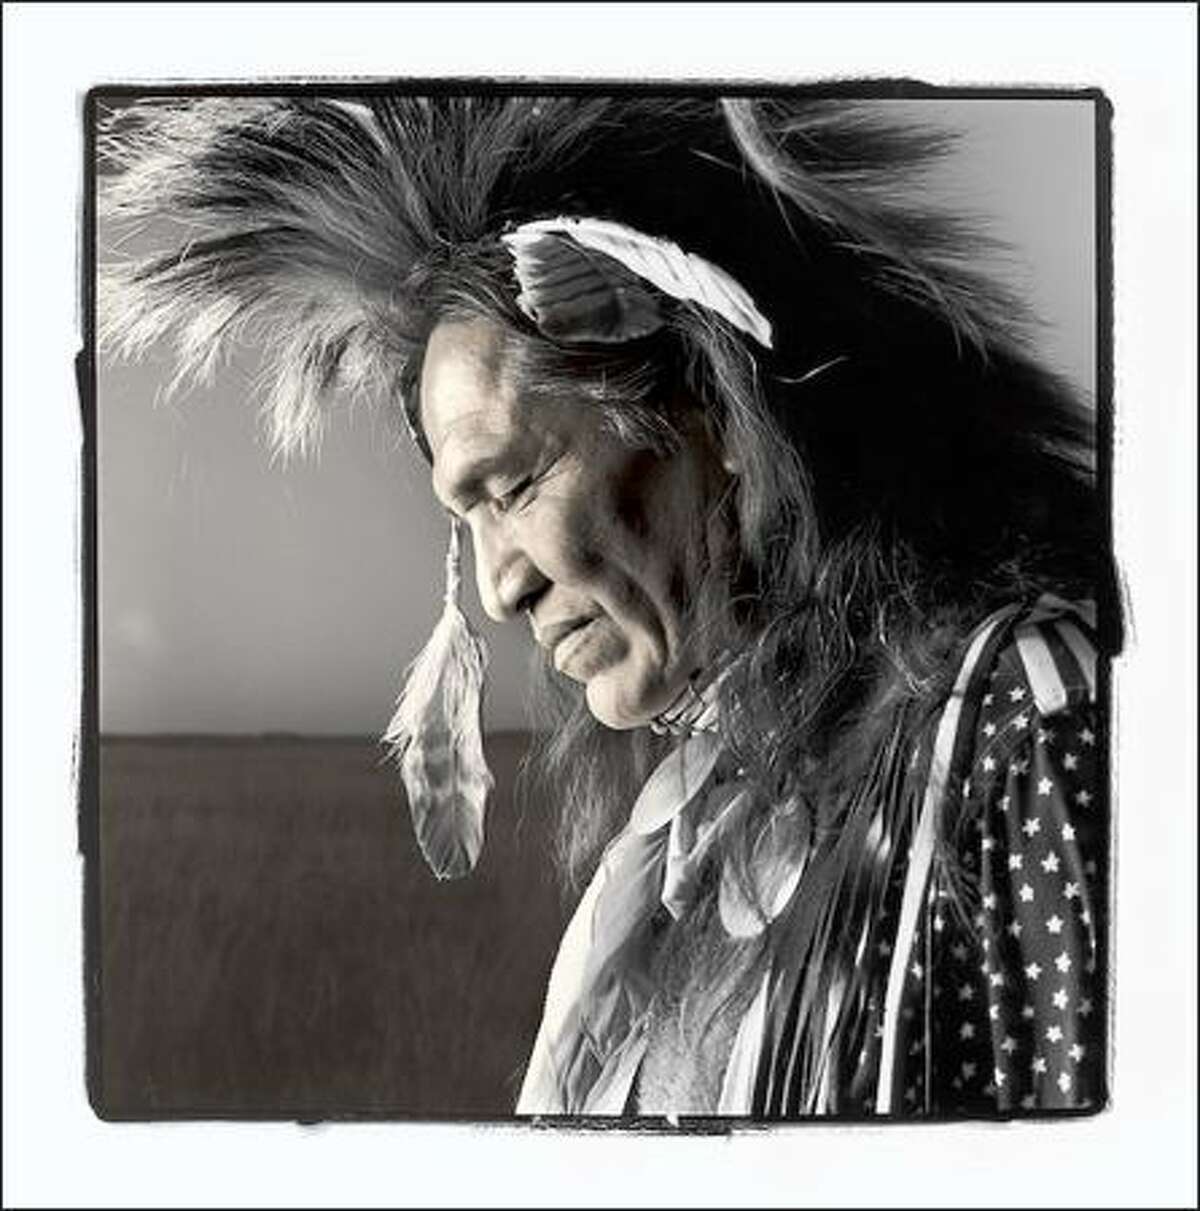 "Roy Pete, 44, Navajo, Ft. Washakie, Wyoming, 1998," by Phil Borges